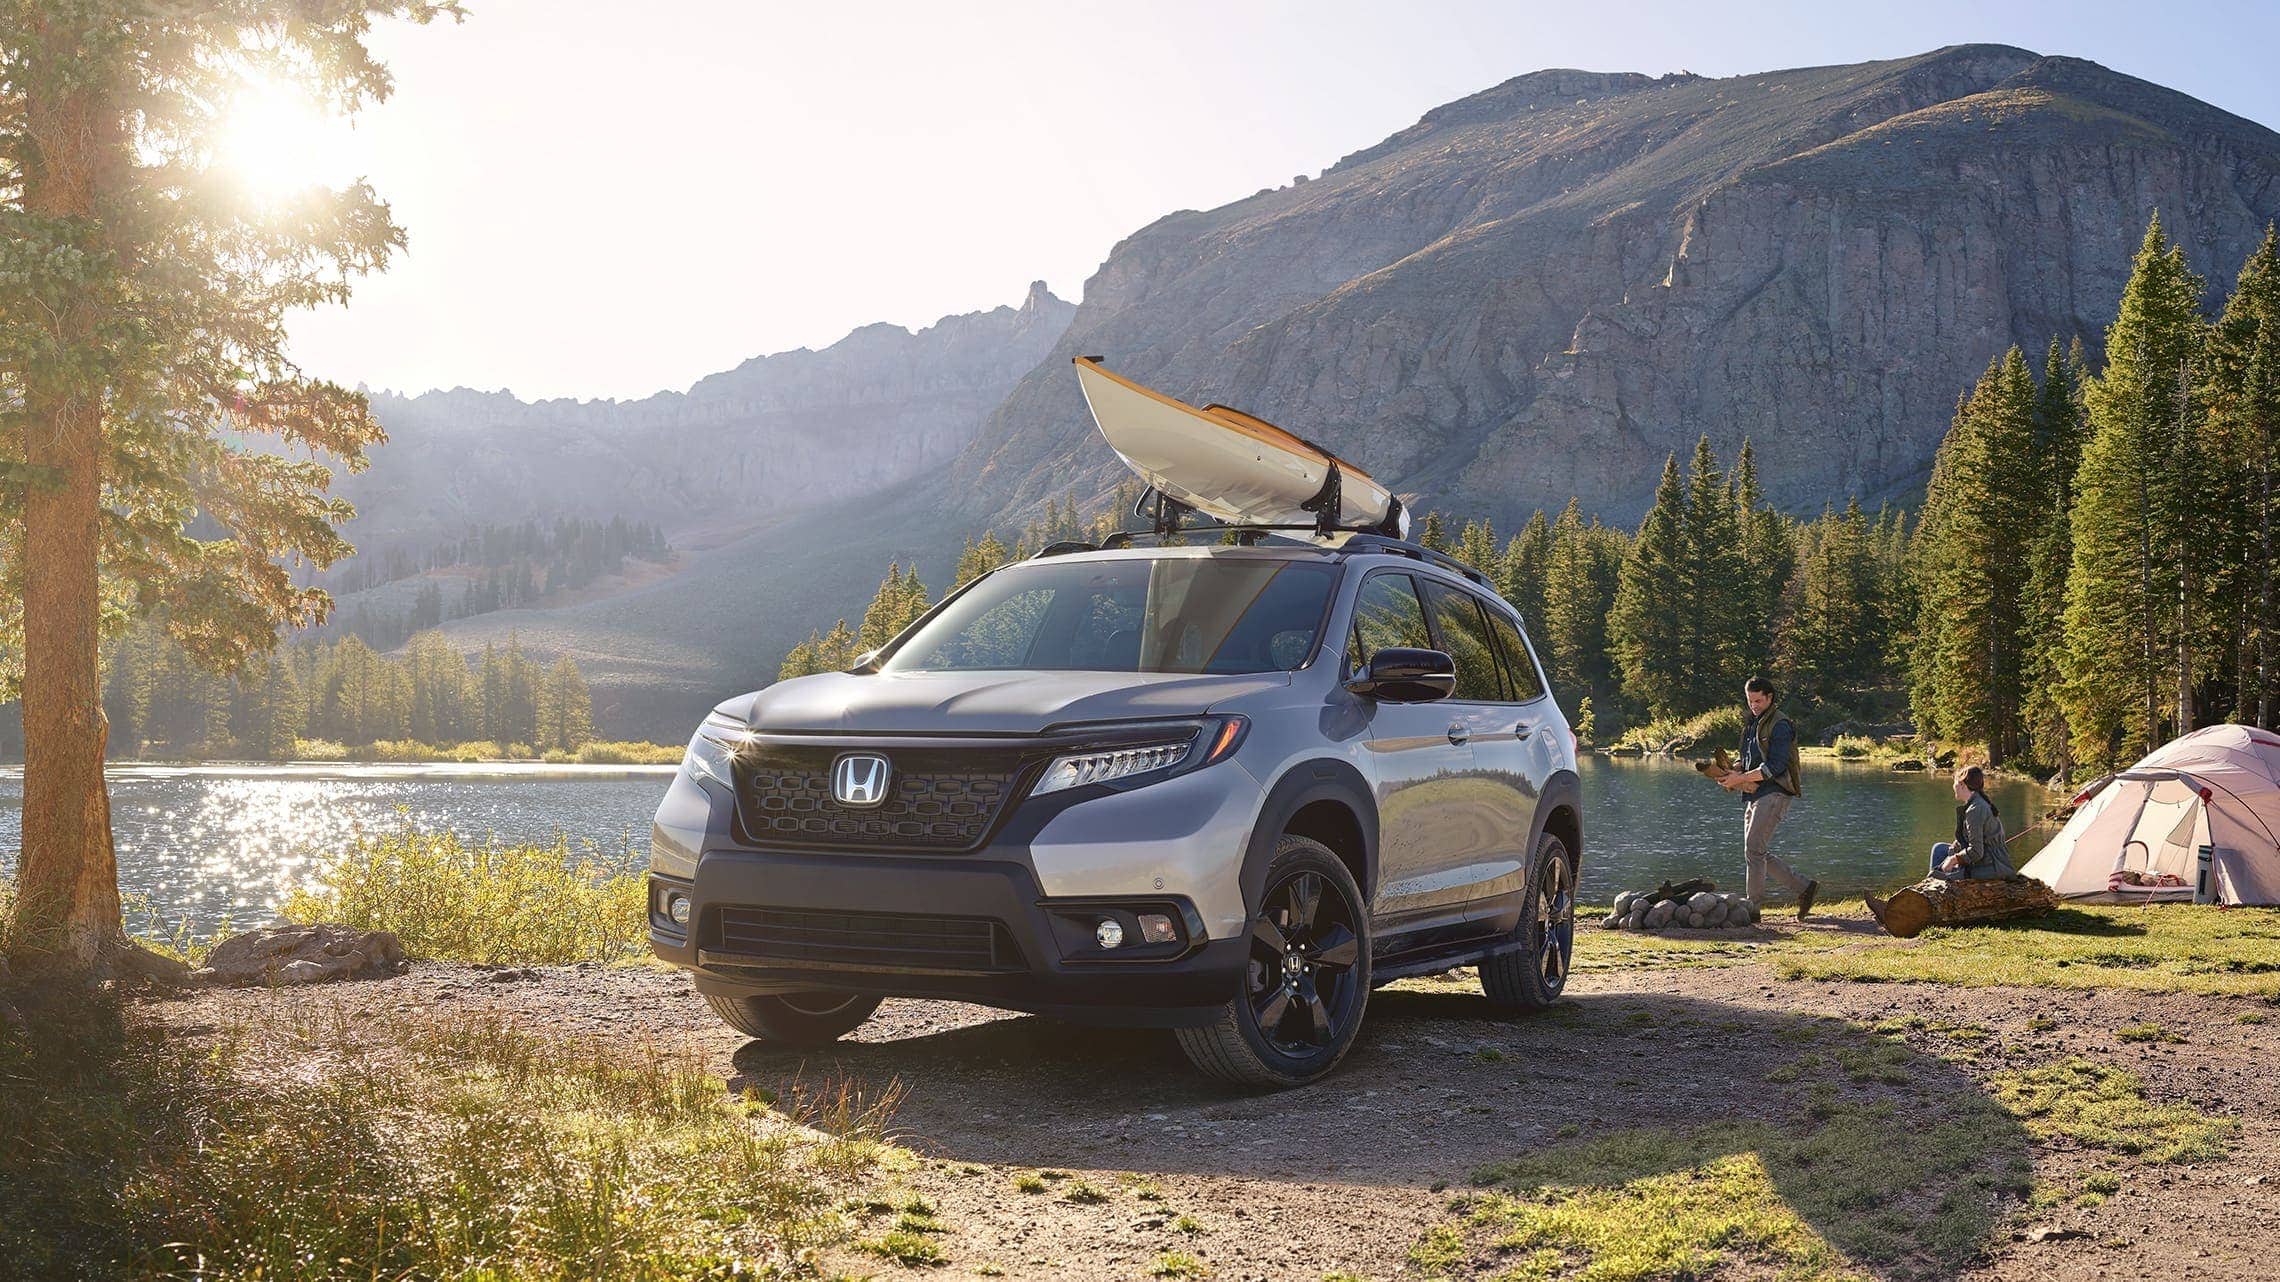 Driver-side front 3/4 view of 2019 Honda Passport Elite in Lunar Silver Metallic, with accessory kayak attachment, parked at a lakeside campground with a male and female camper.